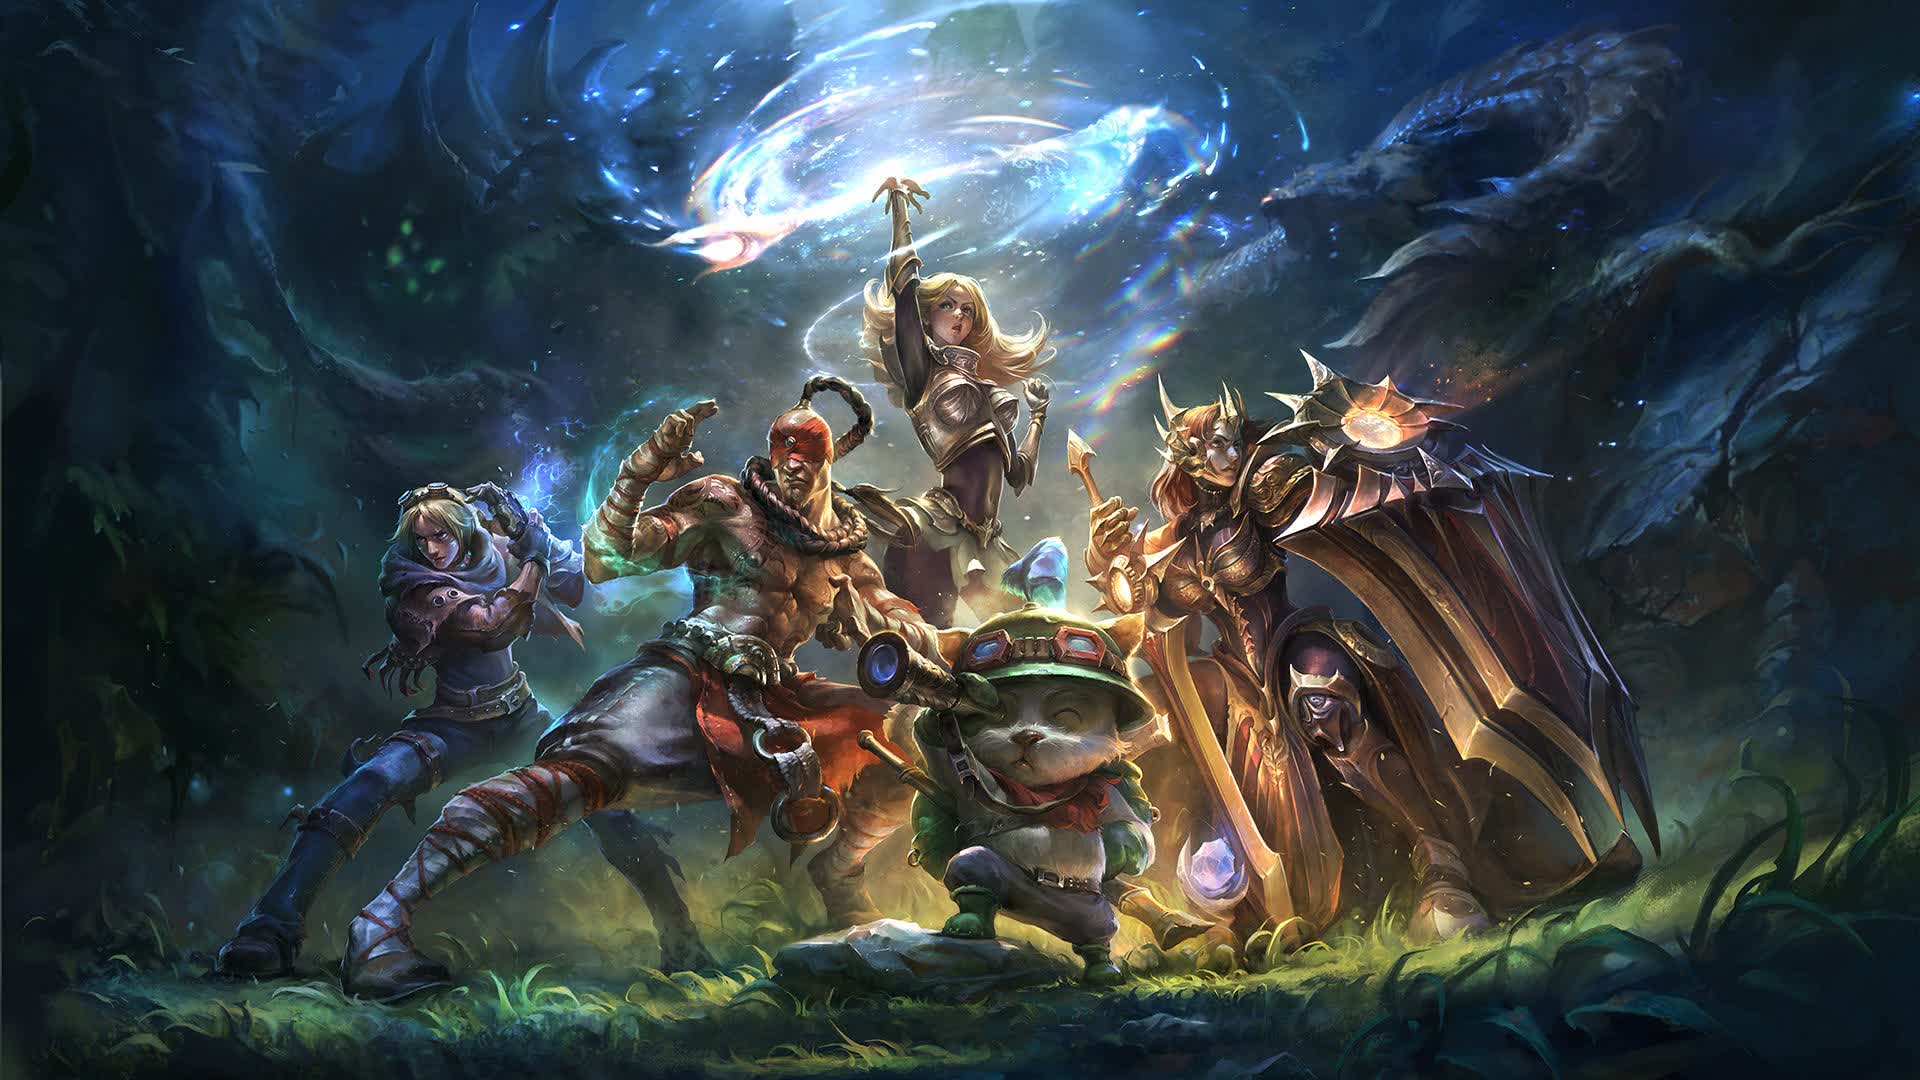 League of Legends franchise hits 180 million monthly active players